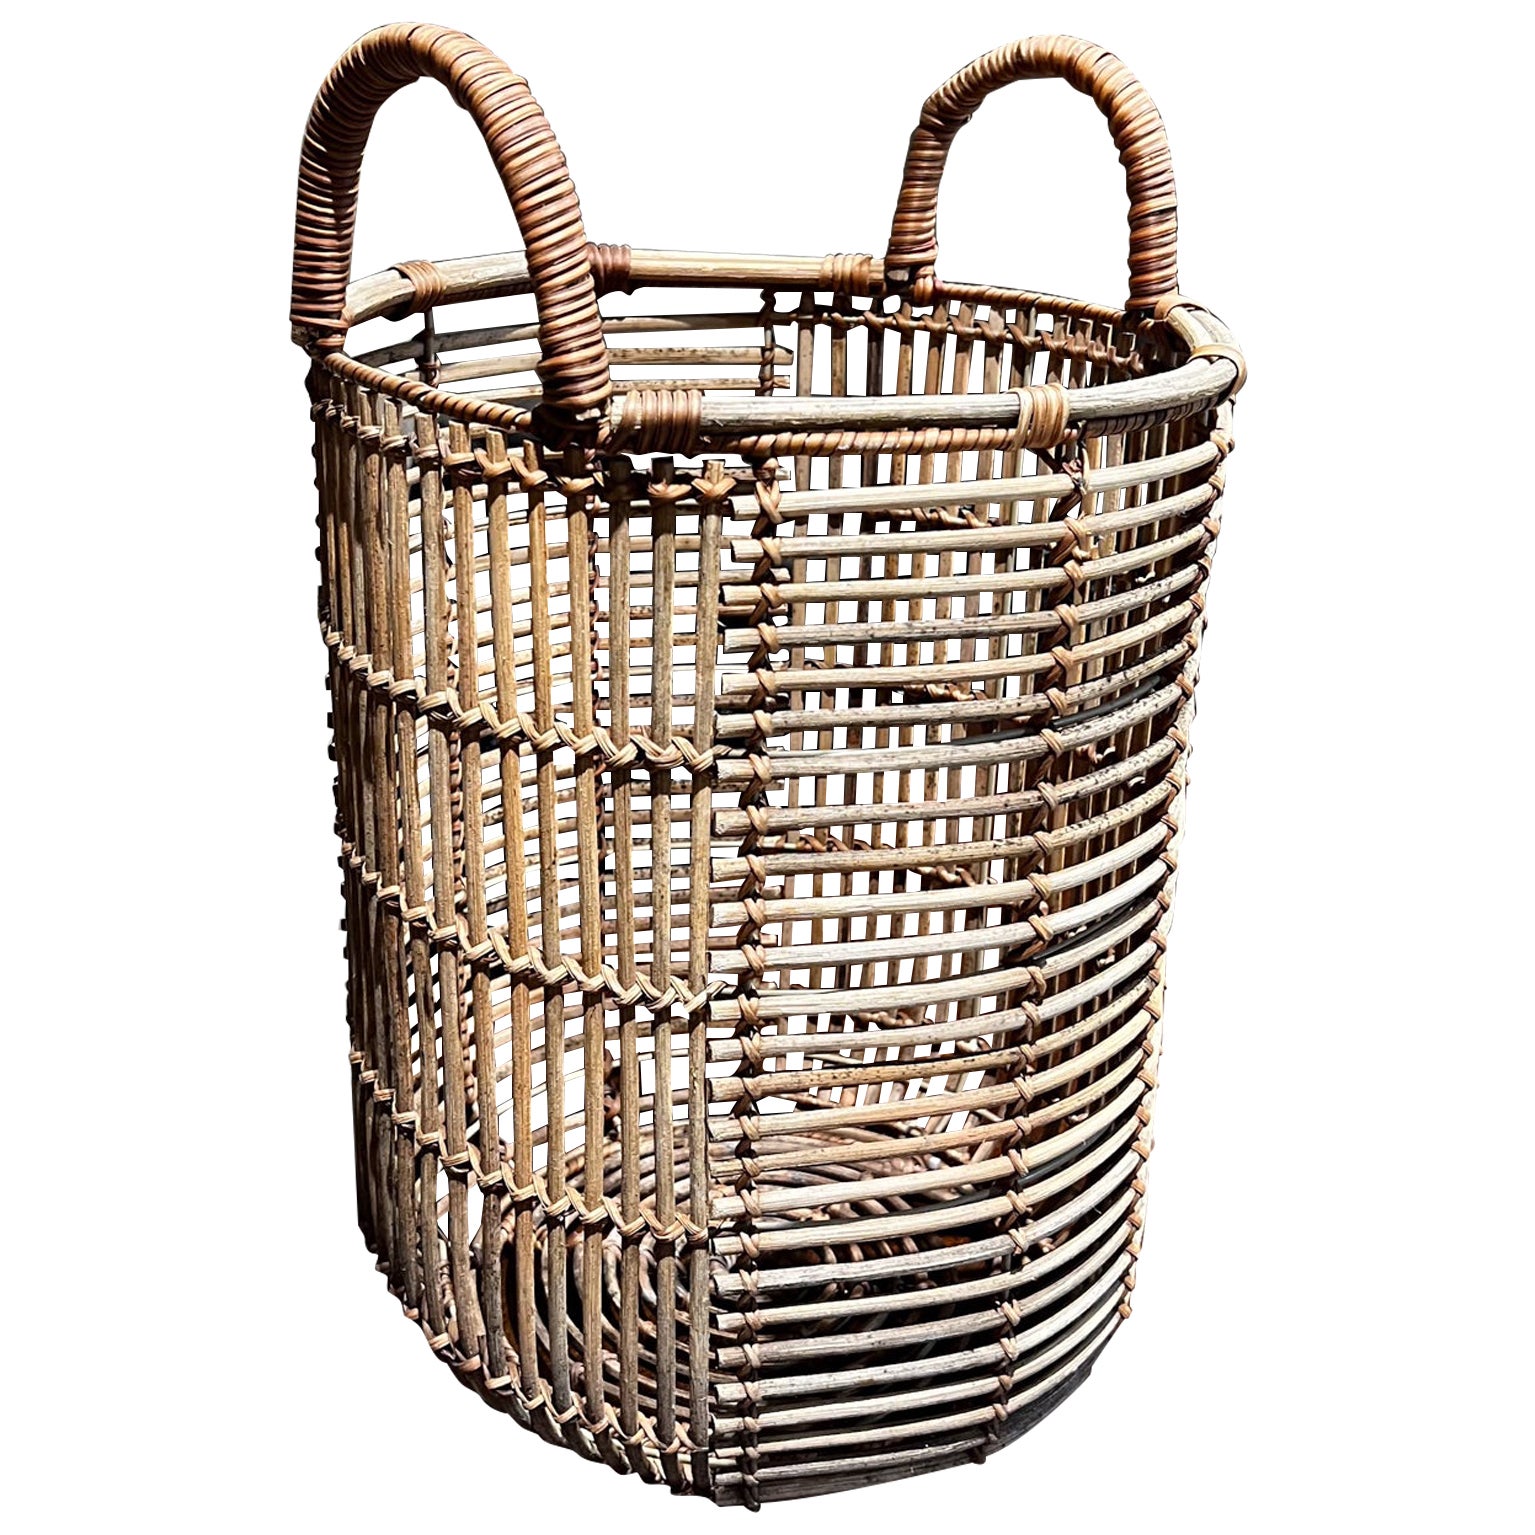 1960s Woven Basket Planter Catch-All with Carry Handle